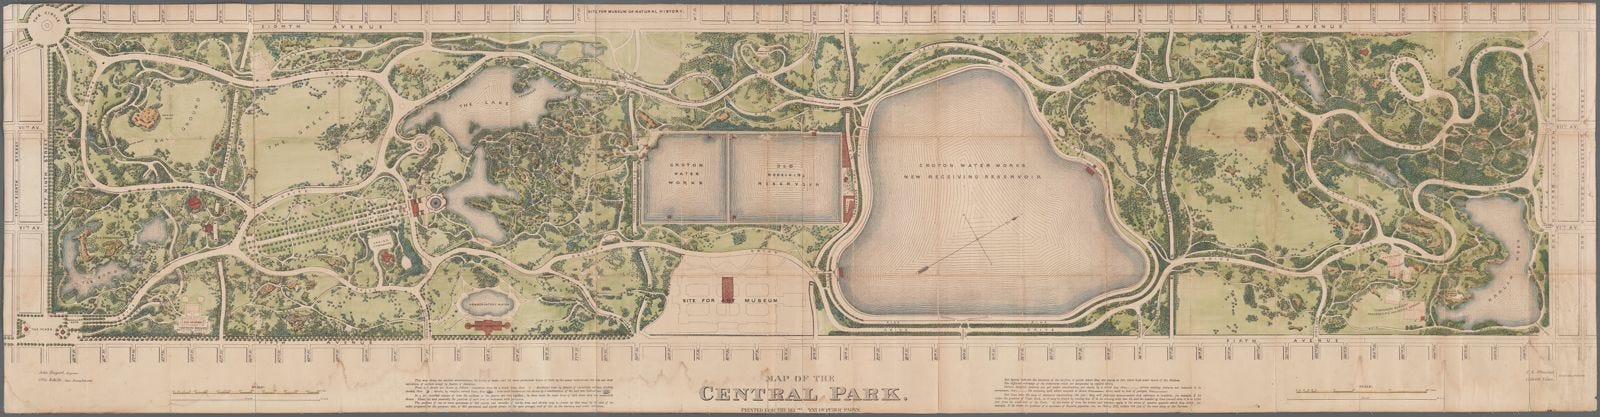 A scan of a detailed map of Central Park in New York City. Roads, fields, lakes and trees are all here. At bottom, “Site for museum” indicates the future location of the Met.